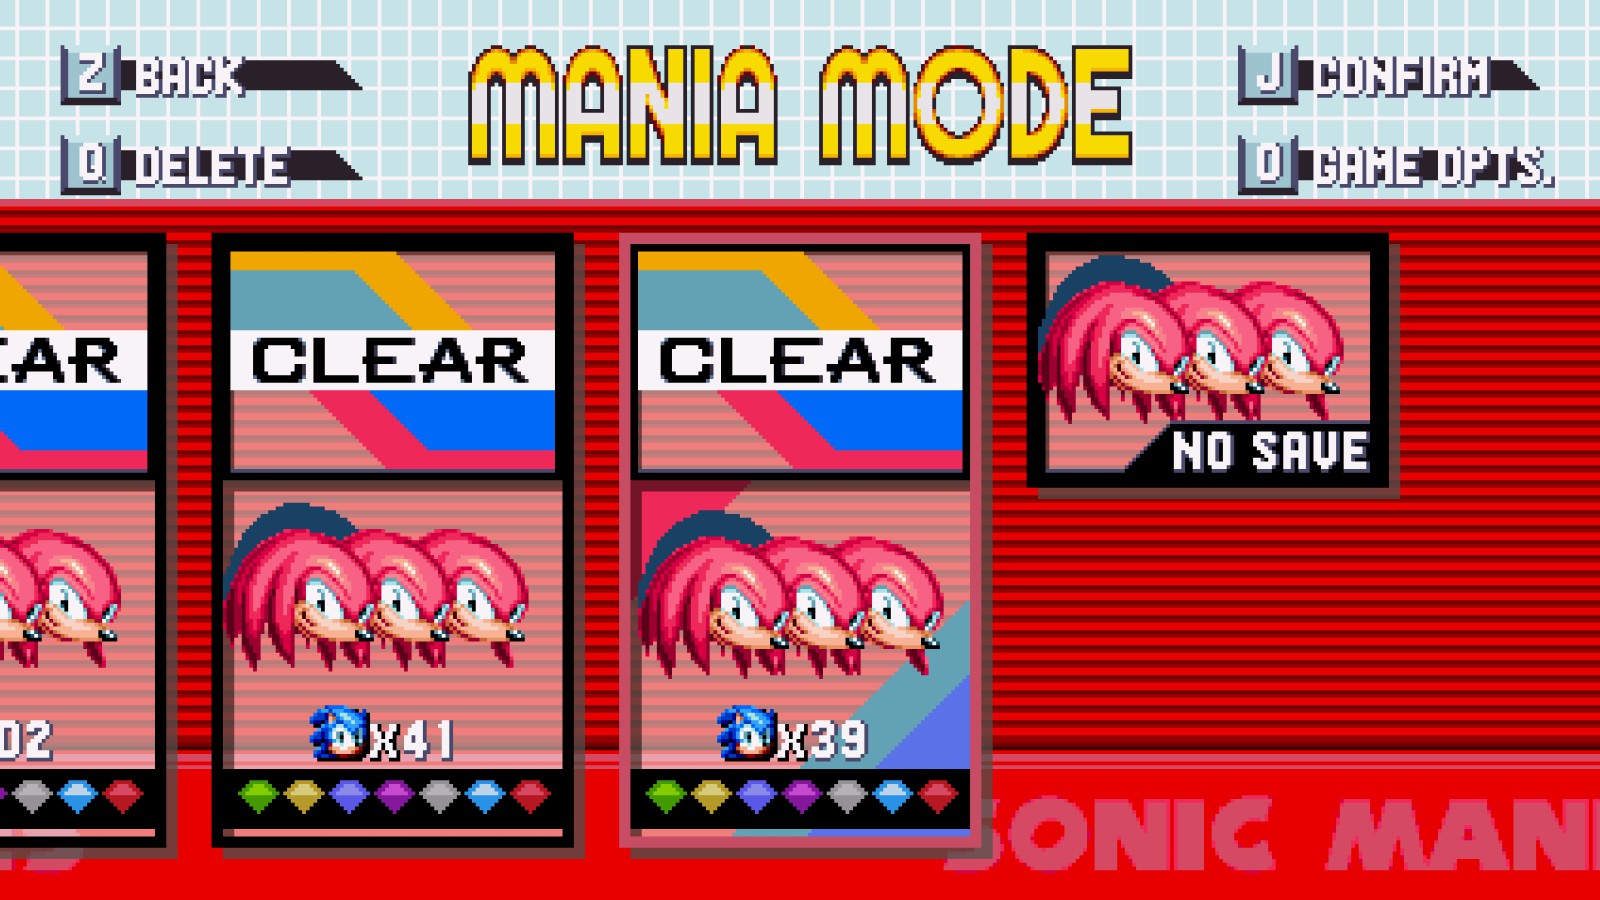 sonic mania on anything but steam